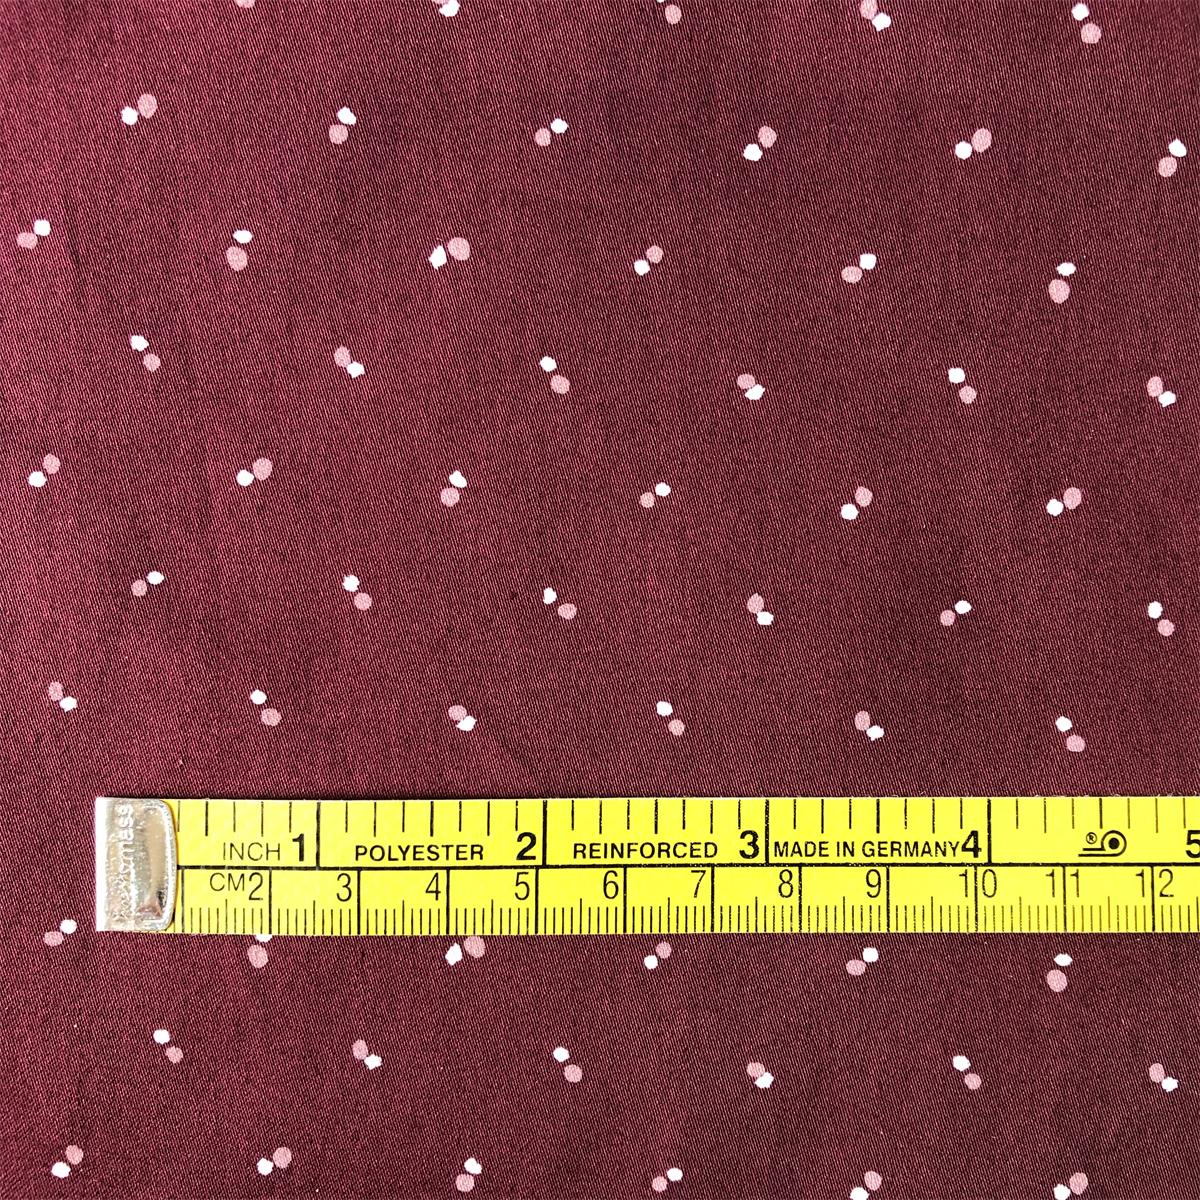 Printed Cotton Shirts Manufacturer in China soft comfortable printed cotton poplin shirts fabric for mens casual shirts